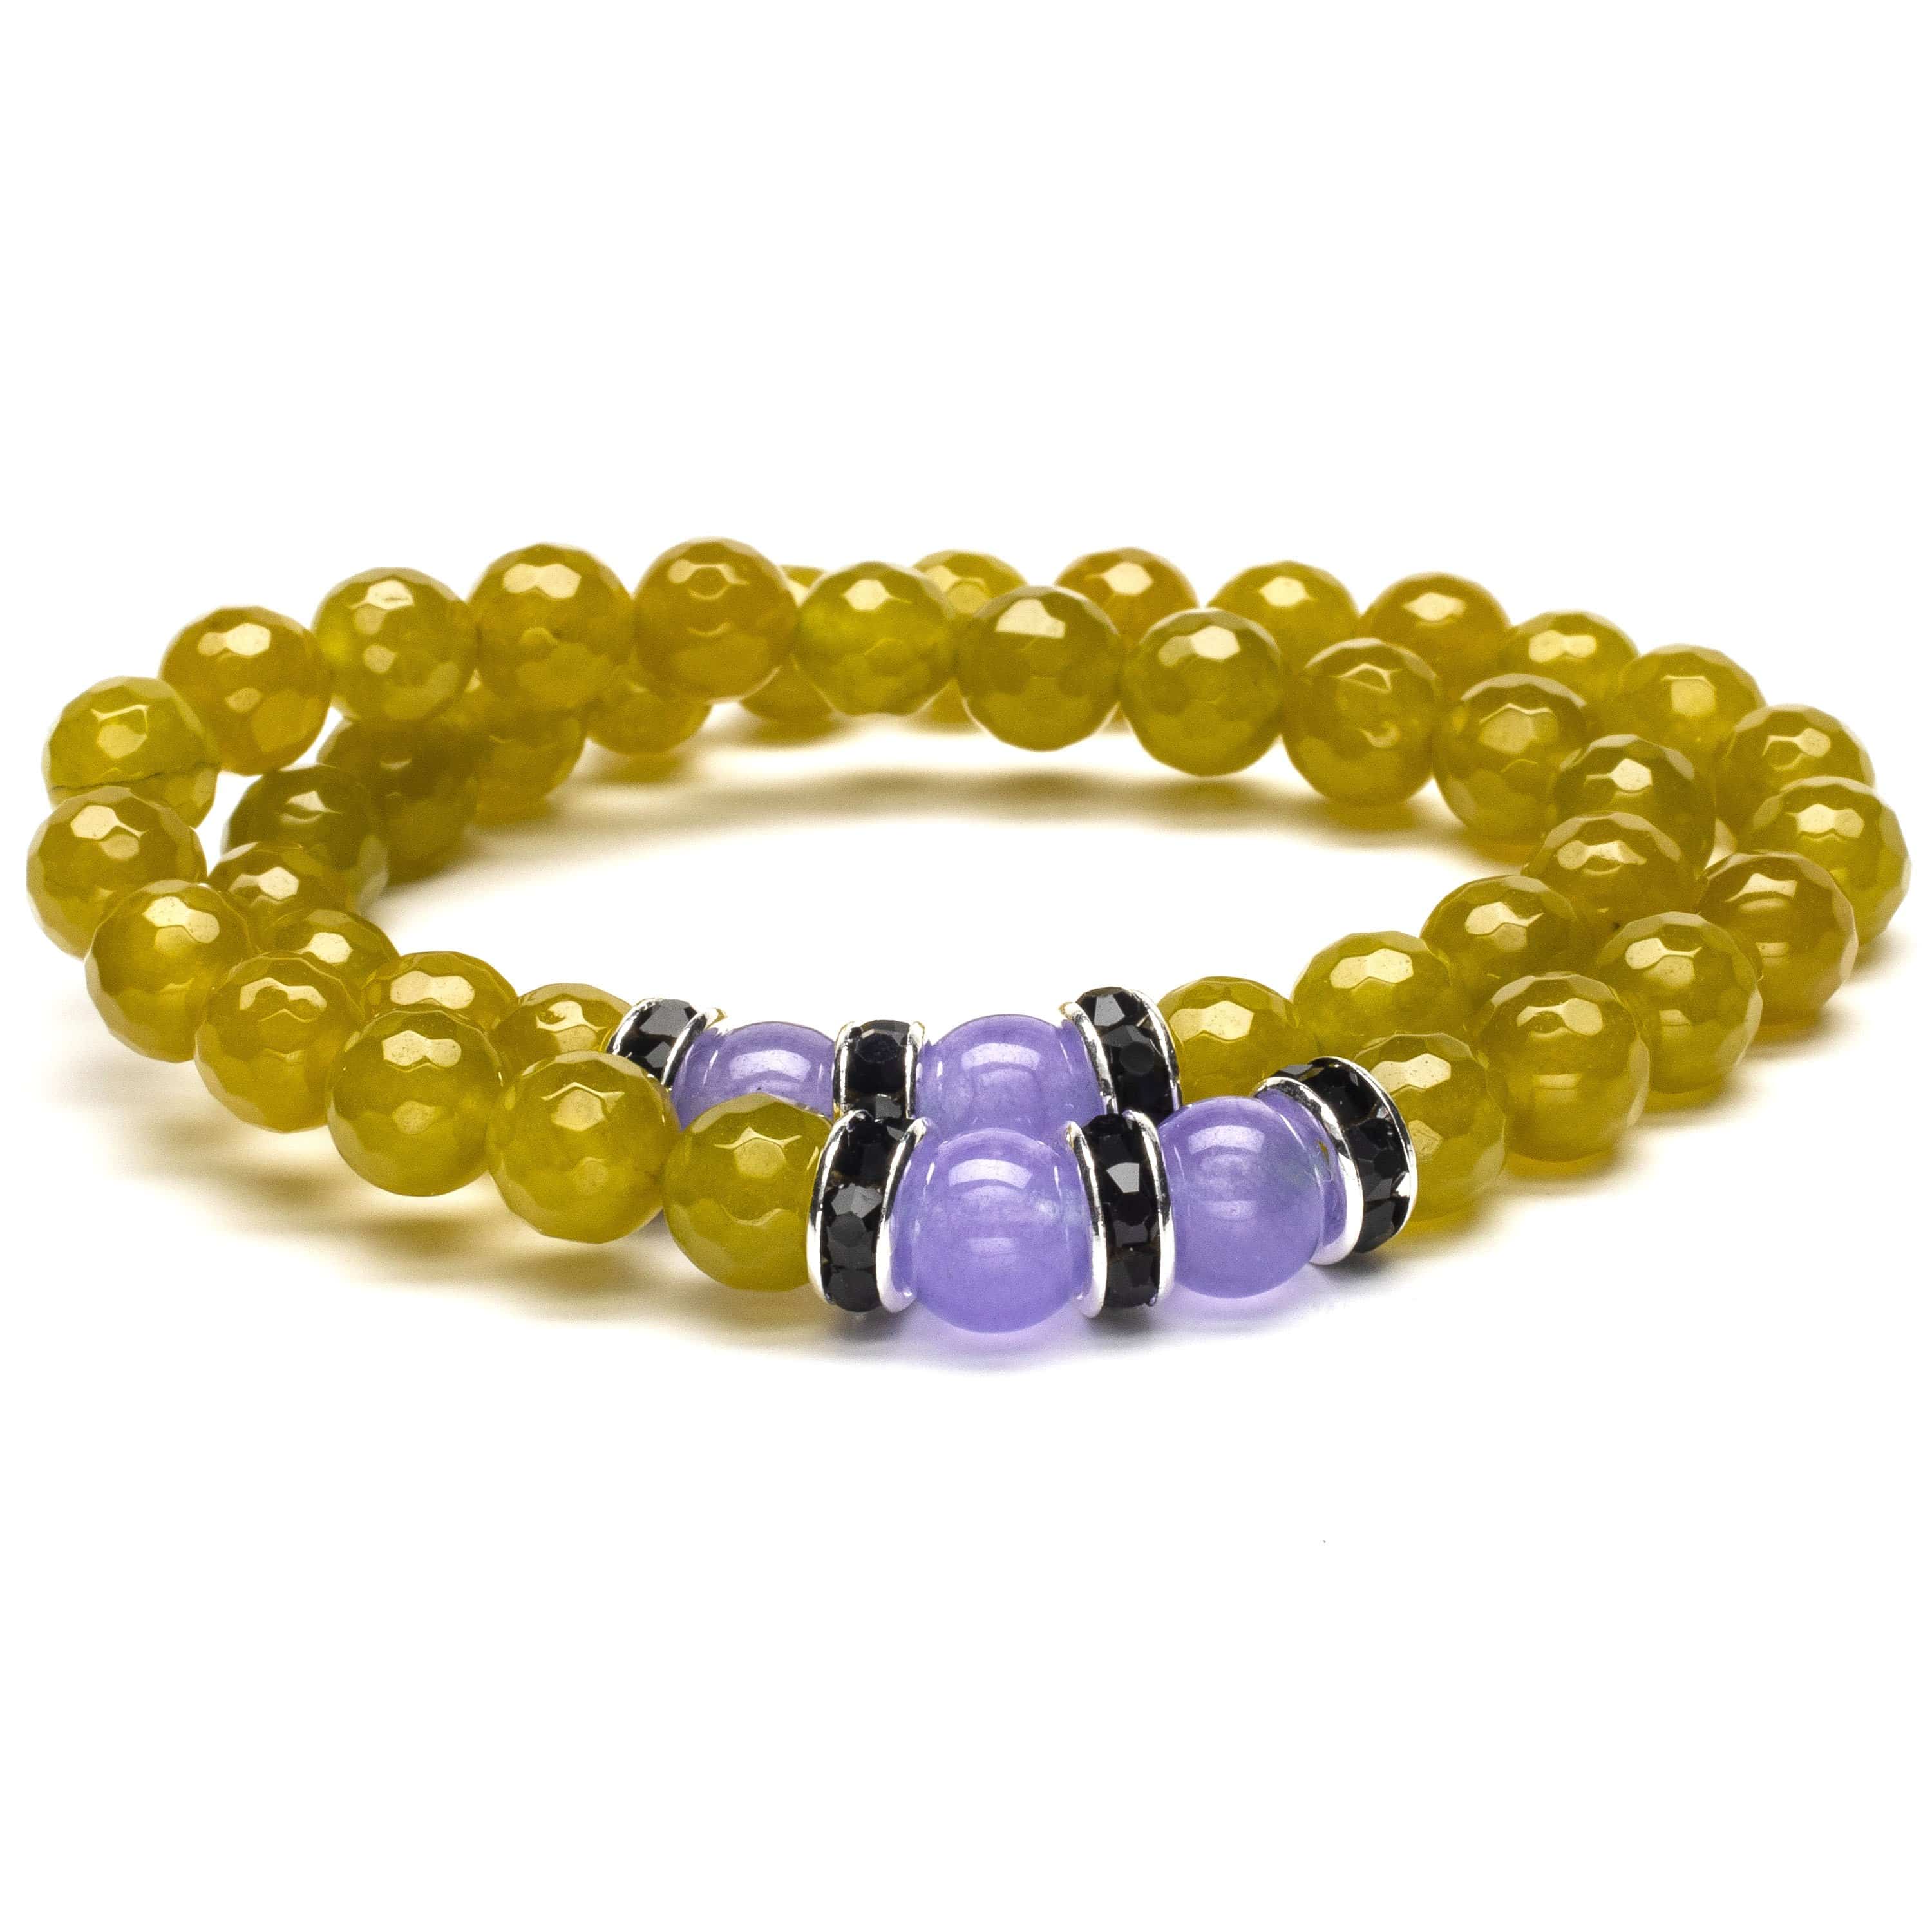 Kalifano Gemstone Bracelets Faceted Green Agate 8mm Beads with Purple  Agate and Black and Silver Accent Beads Double Wrap Elastic Gemstone Bracelet WHITE-BGI2-026